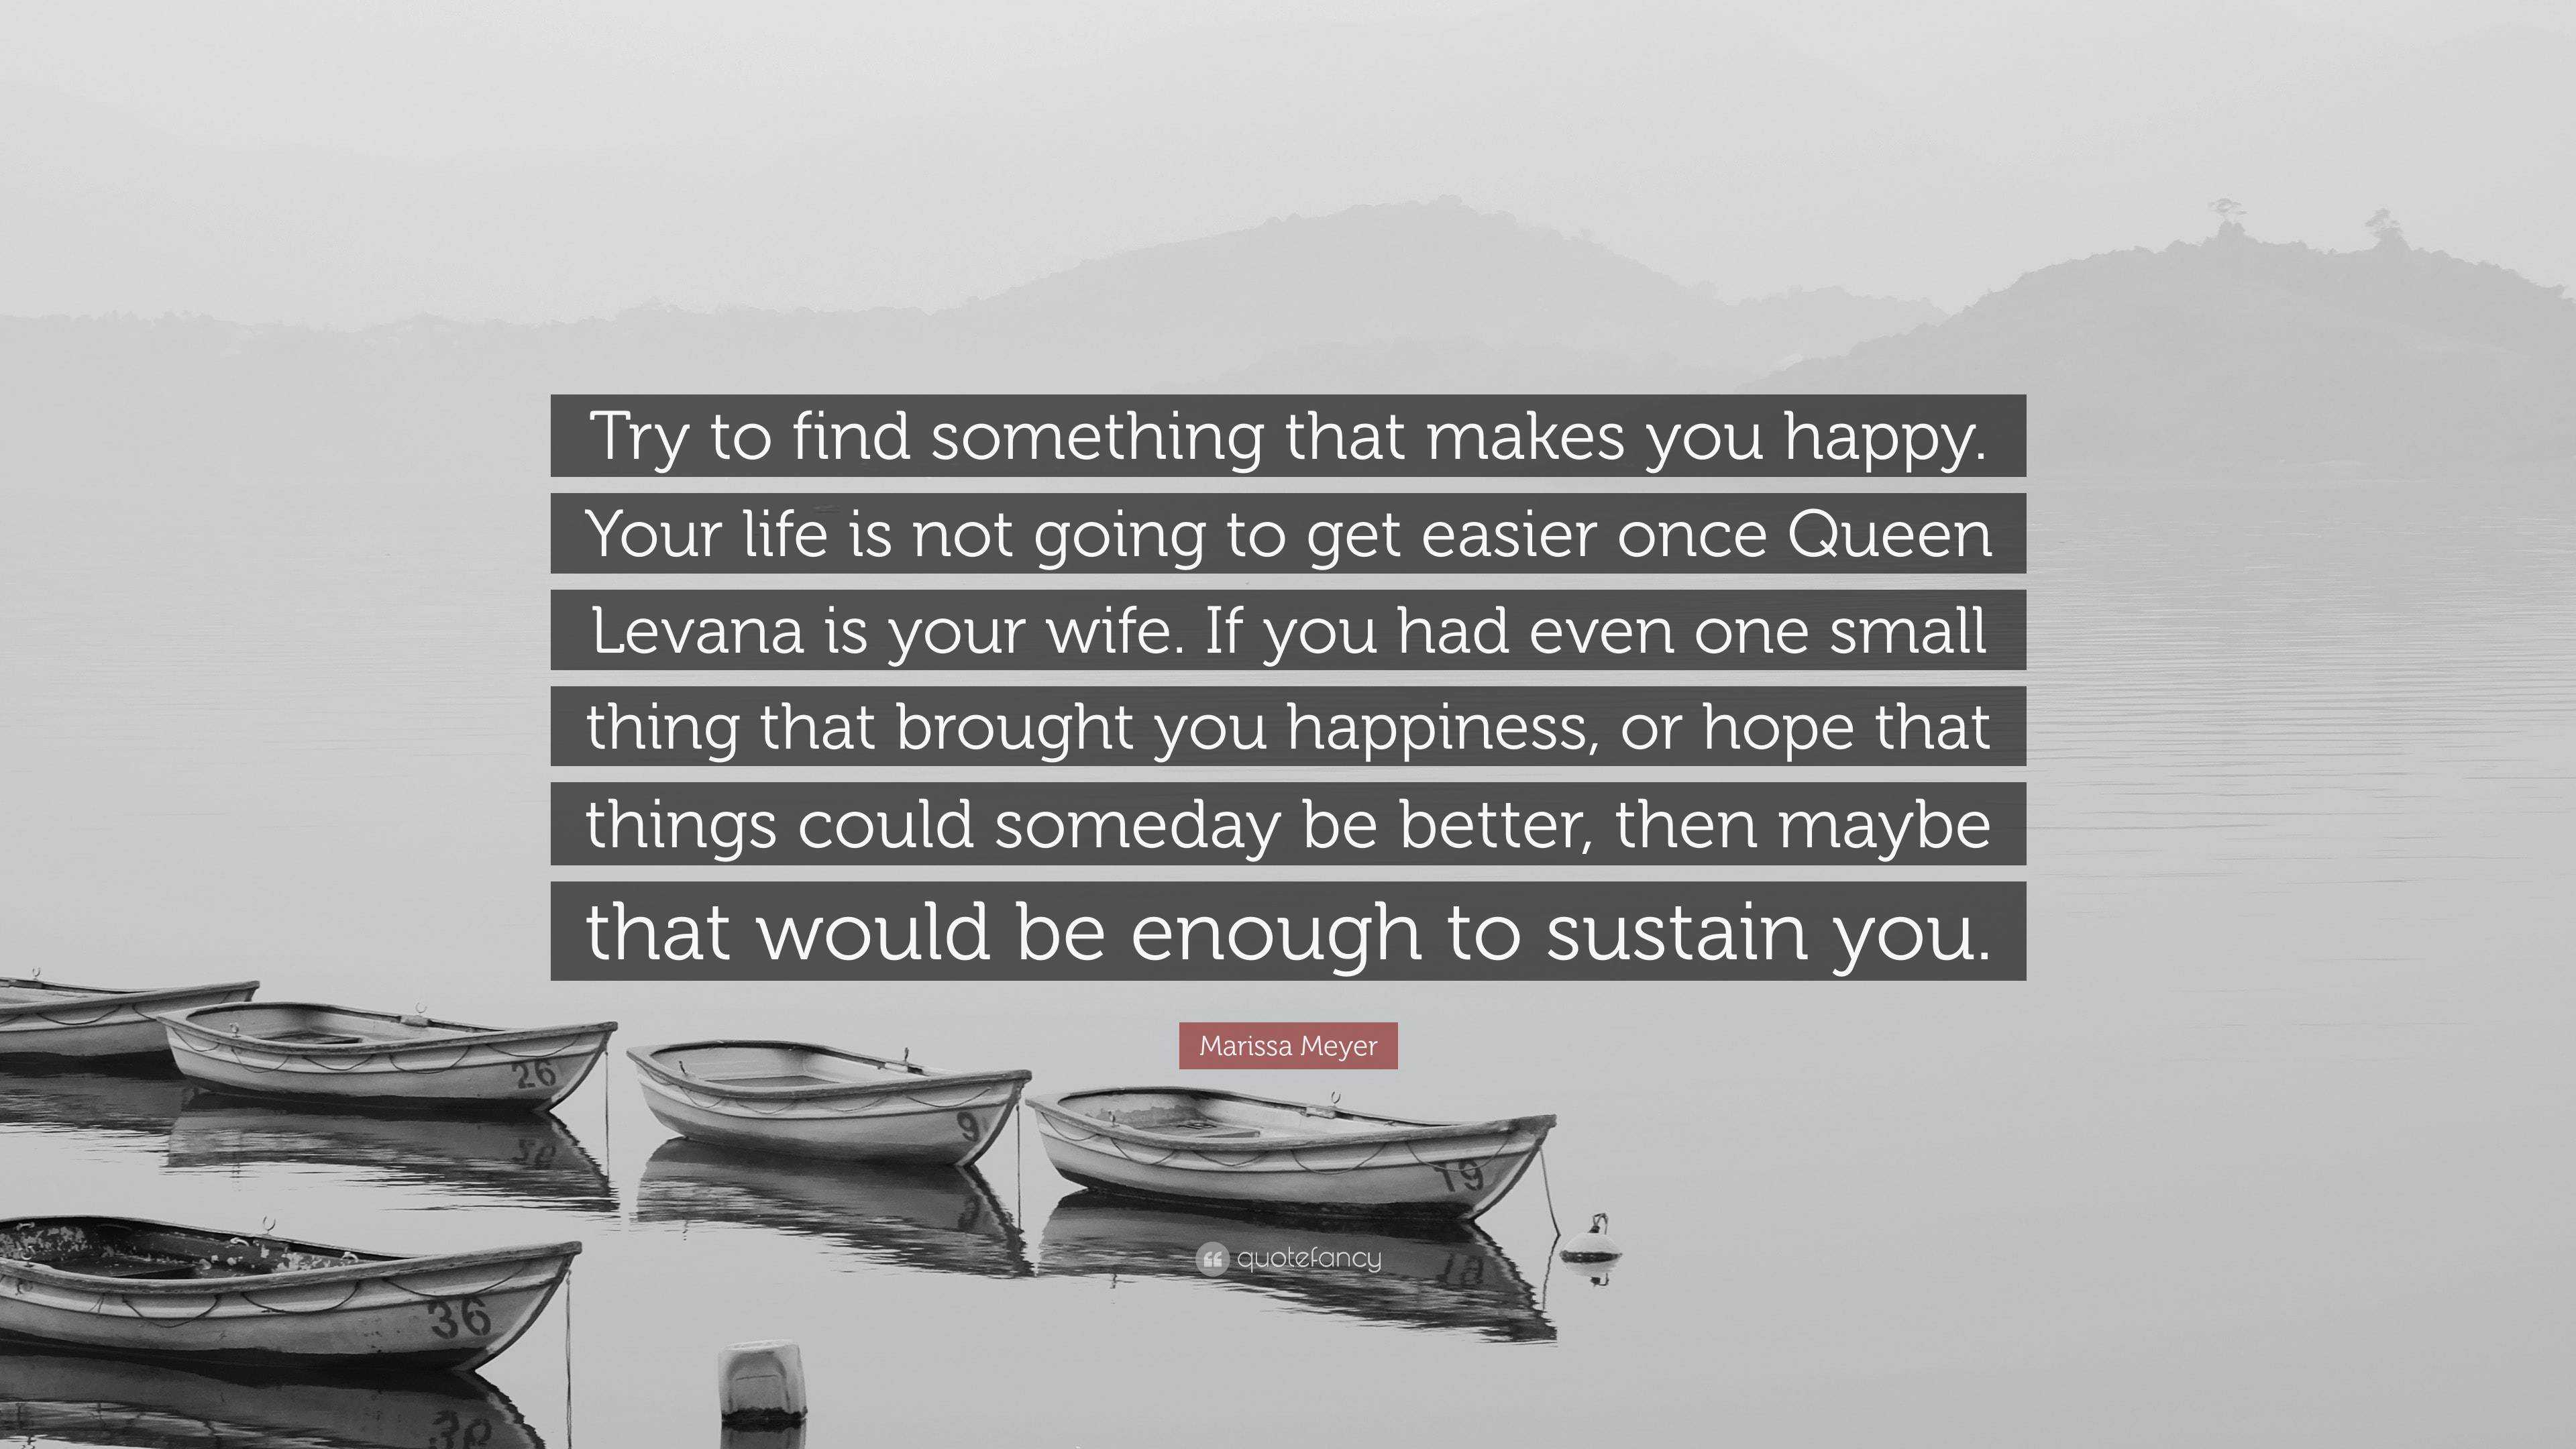 https://quotefancy.com/media/wallpaper/3840x2160/6386465-Marissa-Meyer-Quote-Try-to-find-something-that-makes-you-happy.jpg